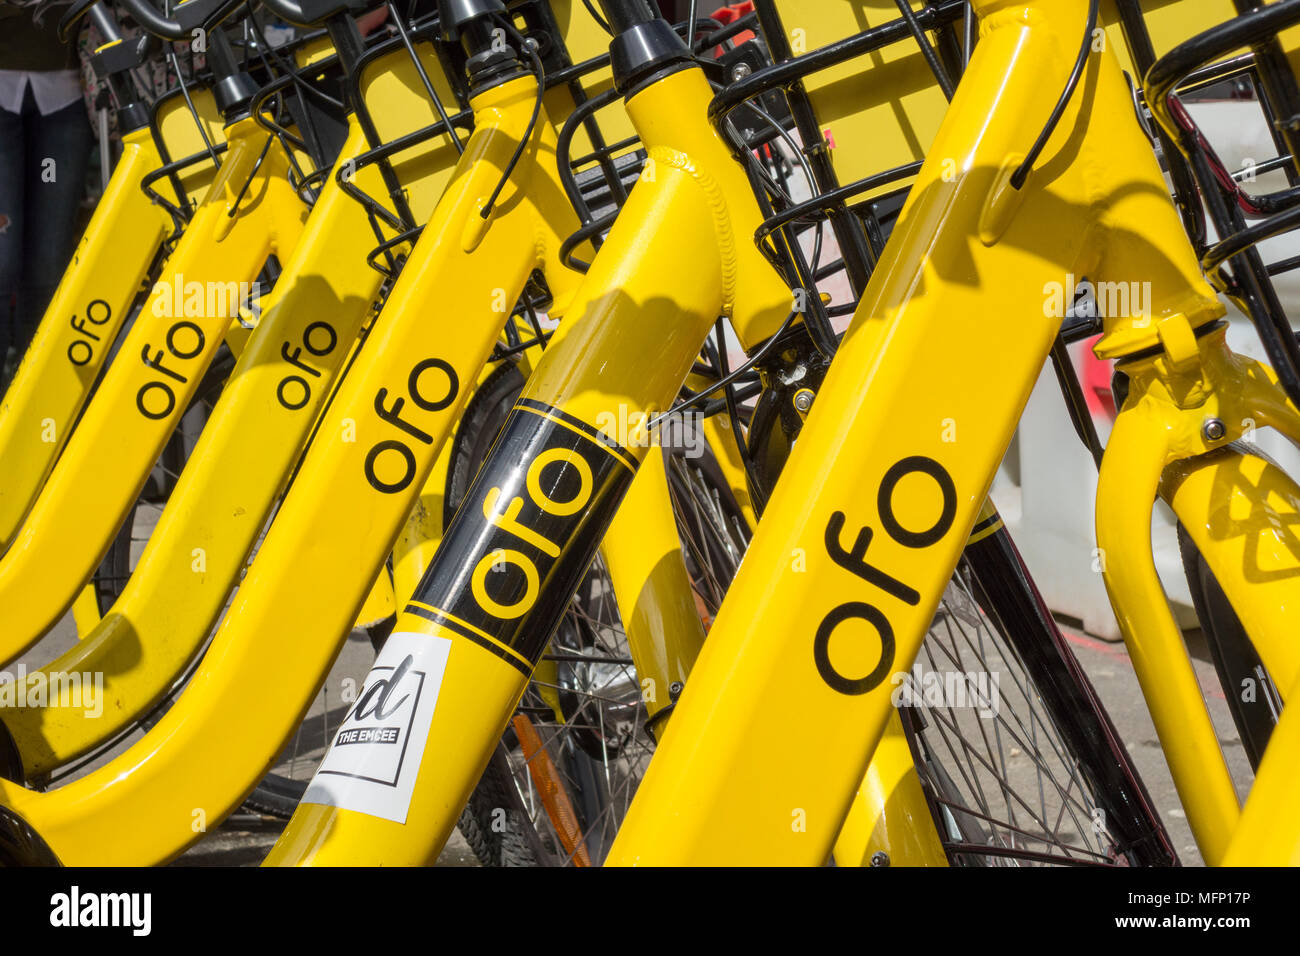 The Alibaba-backed Ofo bike hire scheme is leaving London amongst concerns for its future Stock Photo